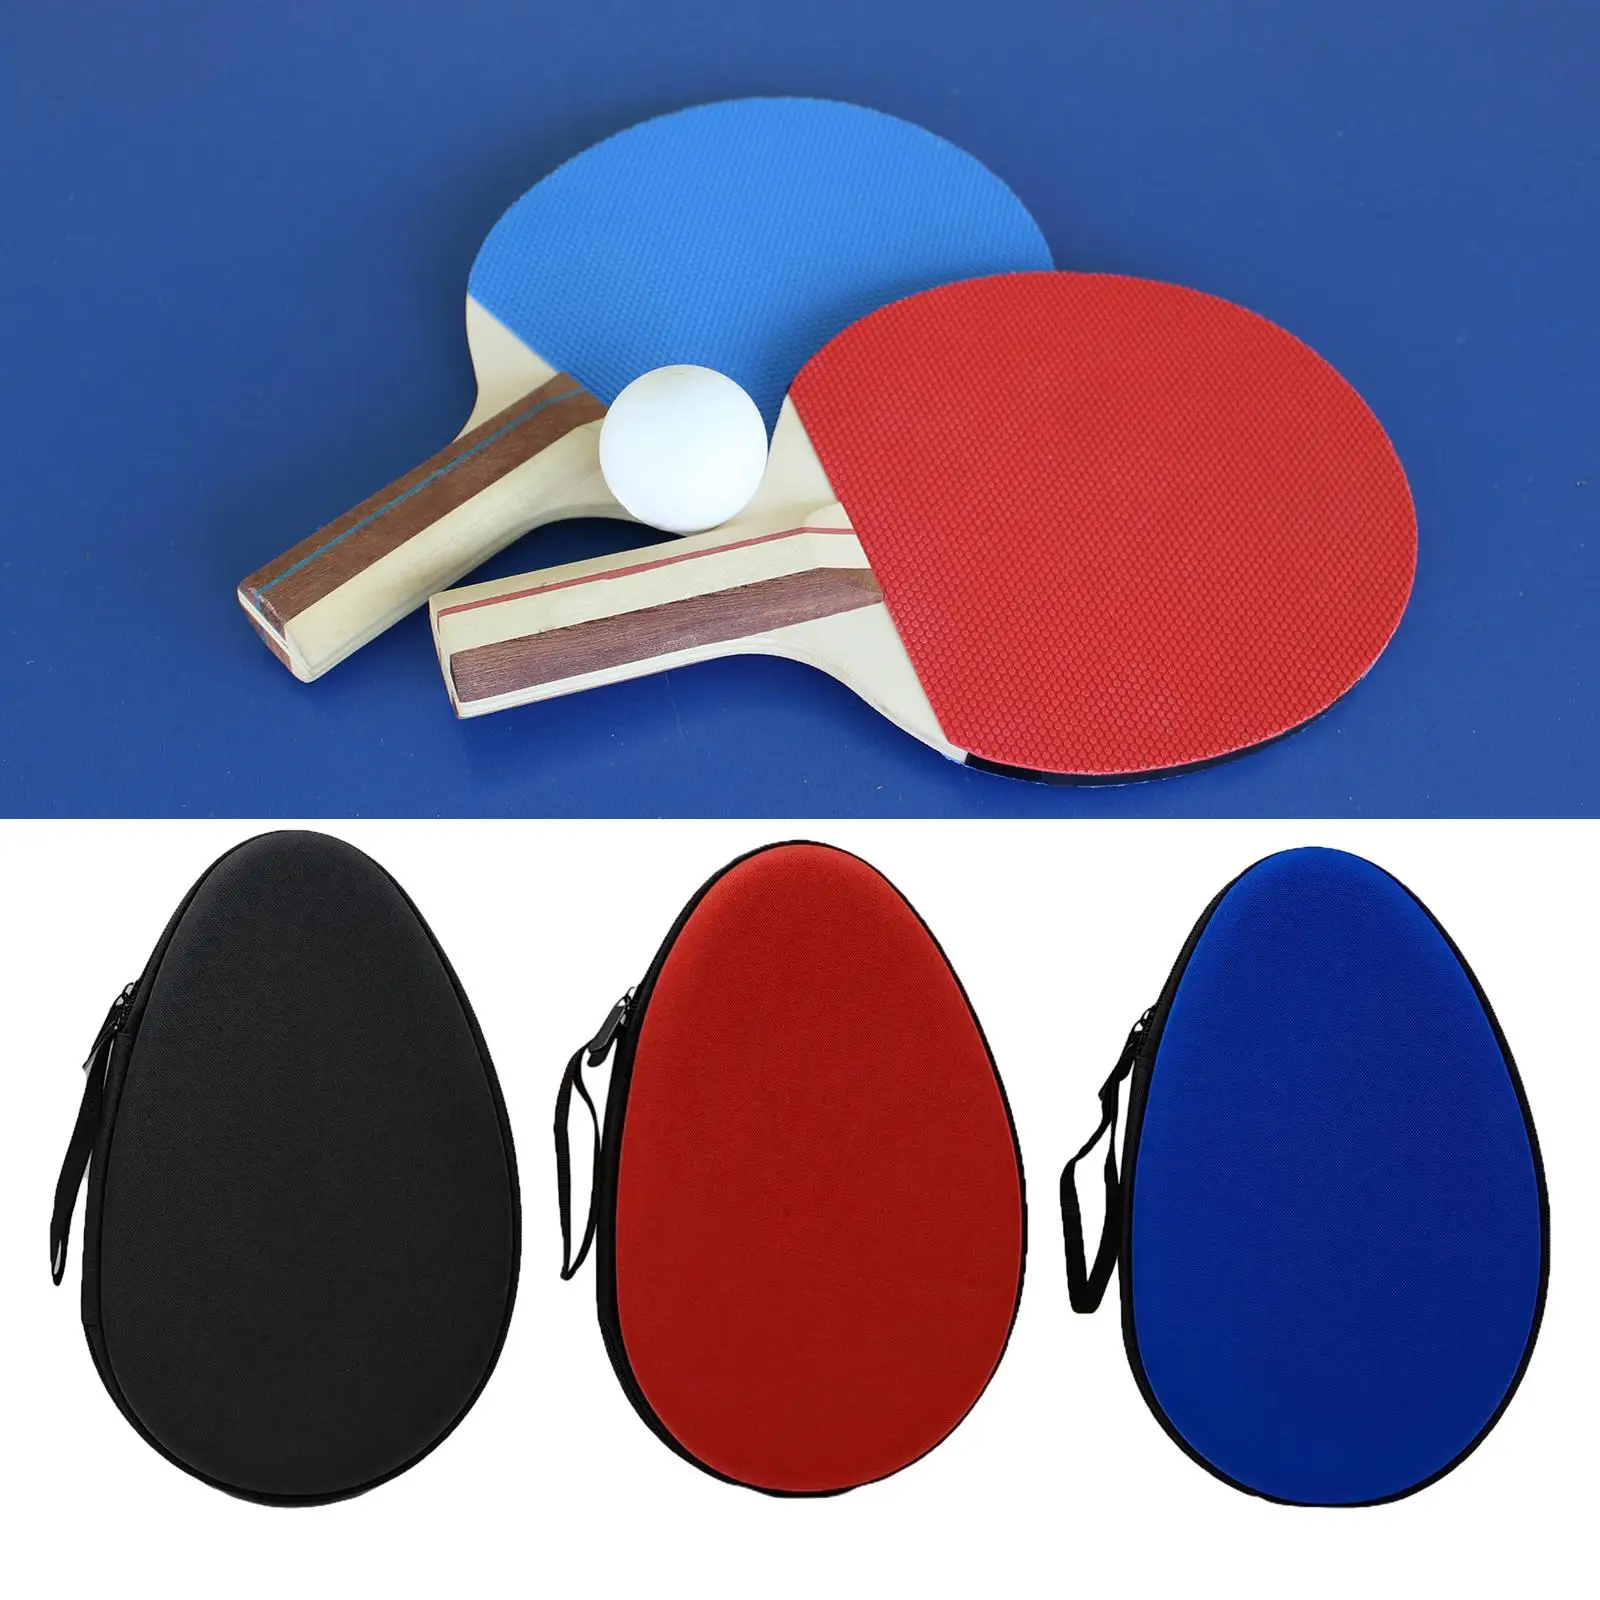 Multifunction Table Tennis Racket Case Storage Case with Zipper Wear Resistant Durable Table Tennis Protector for Travel Indoor